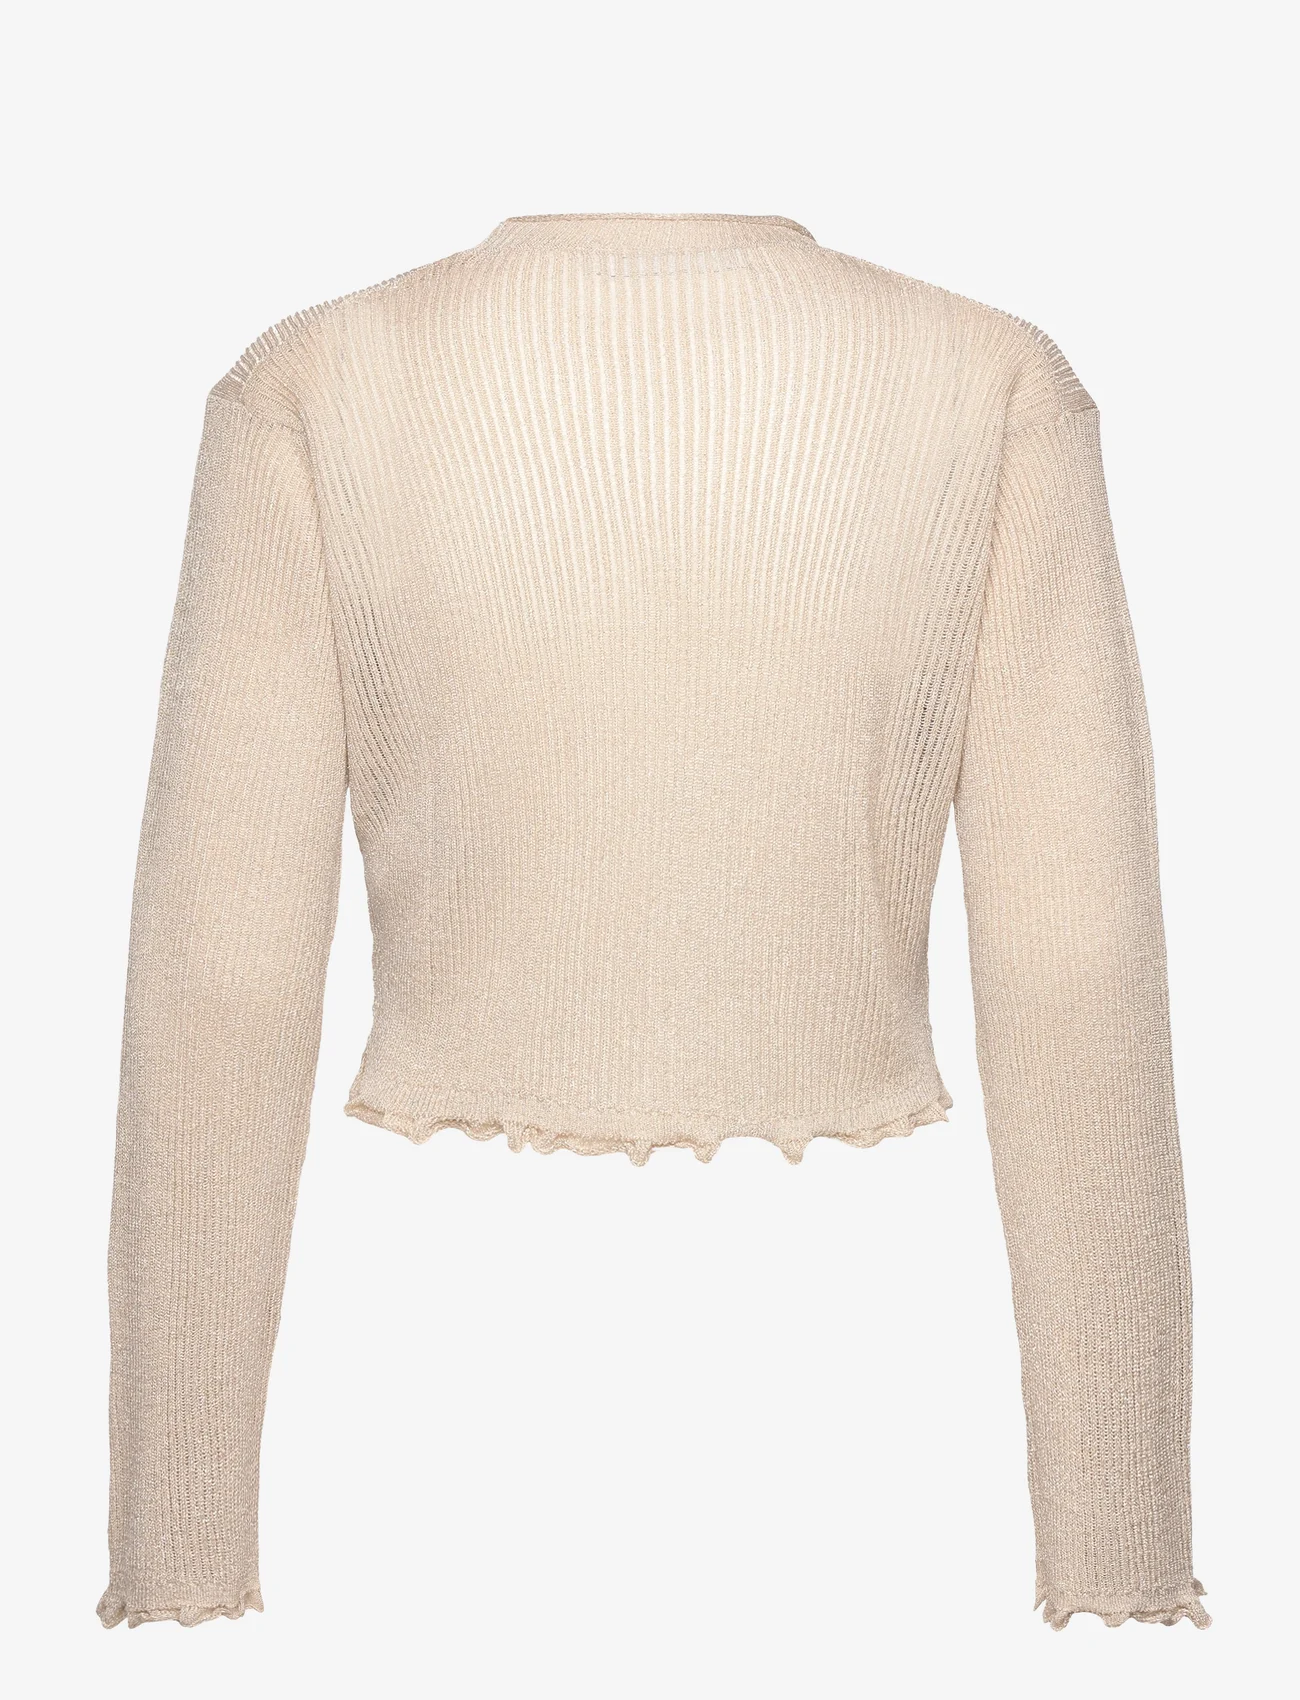 Calvin Klein Jeans - METALLIC SWEATER - jumpers - frosted almond - 1